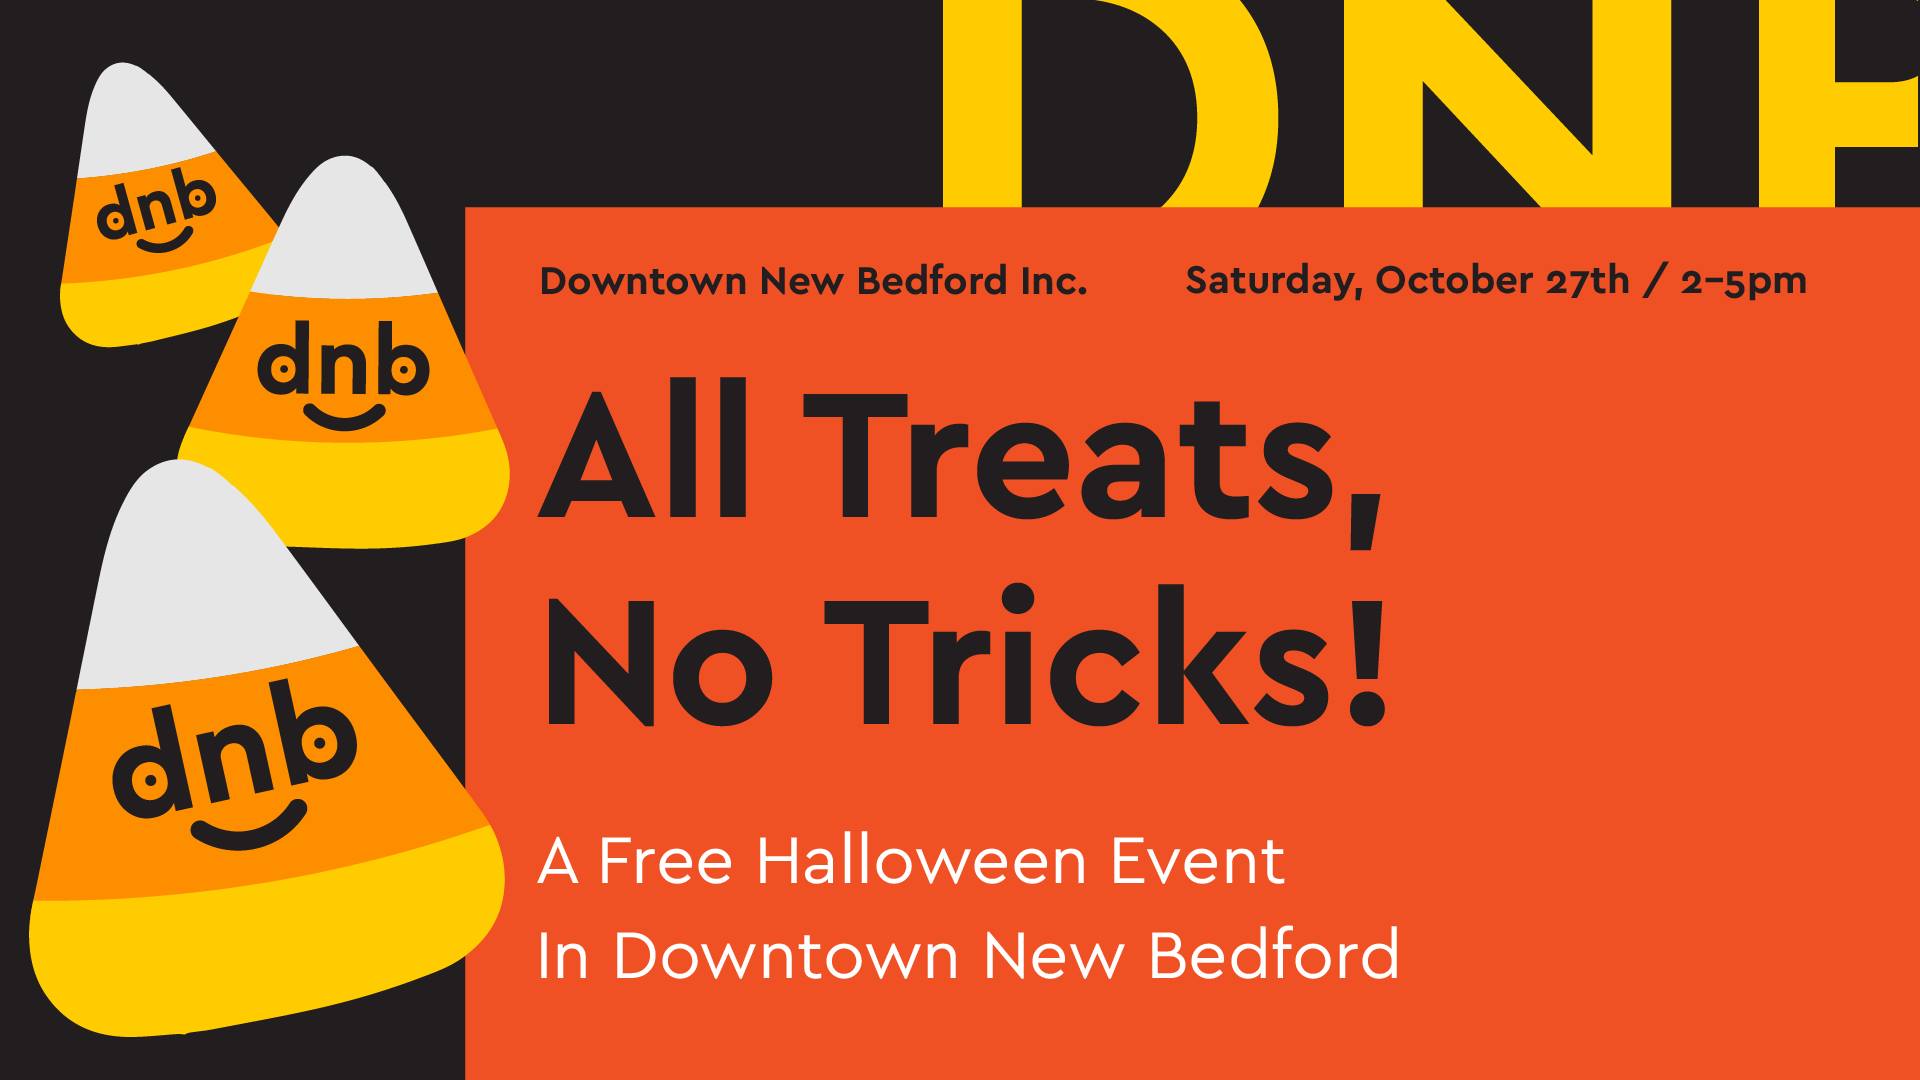 Trick or Treat in dNB! Destination New Bedford